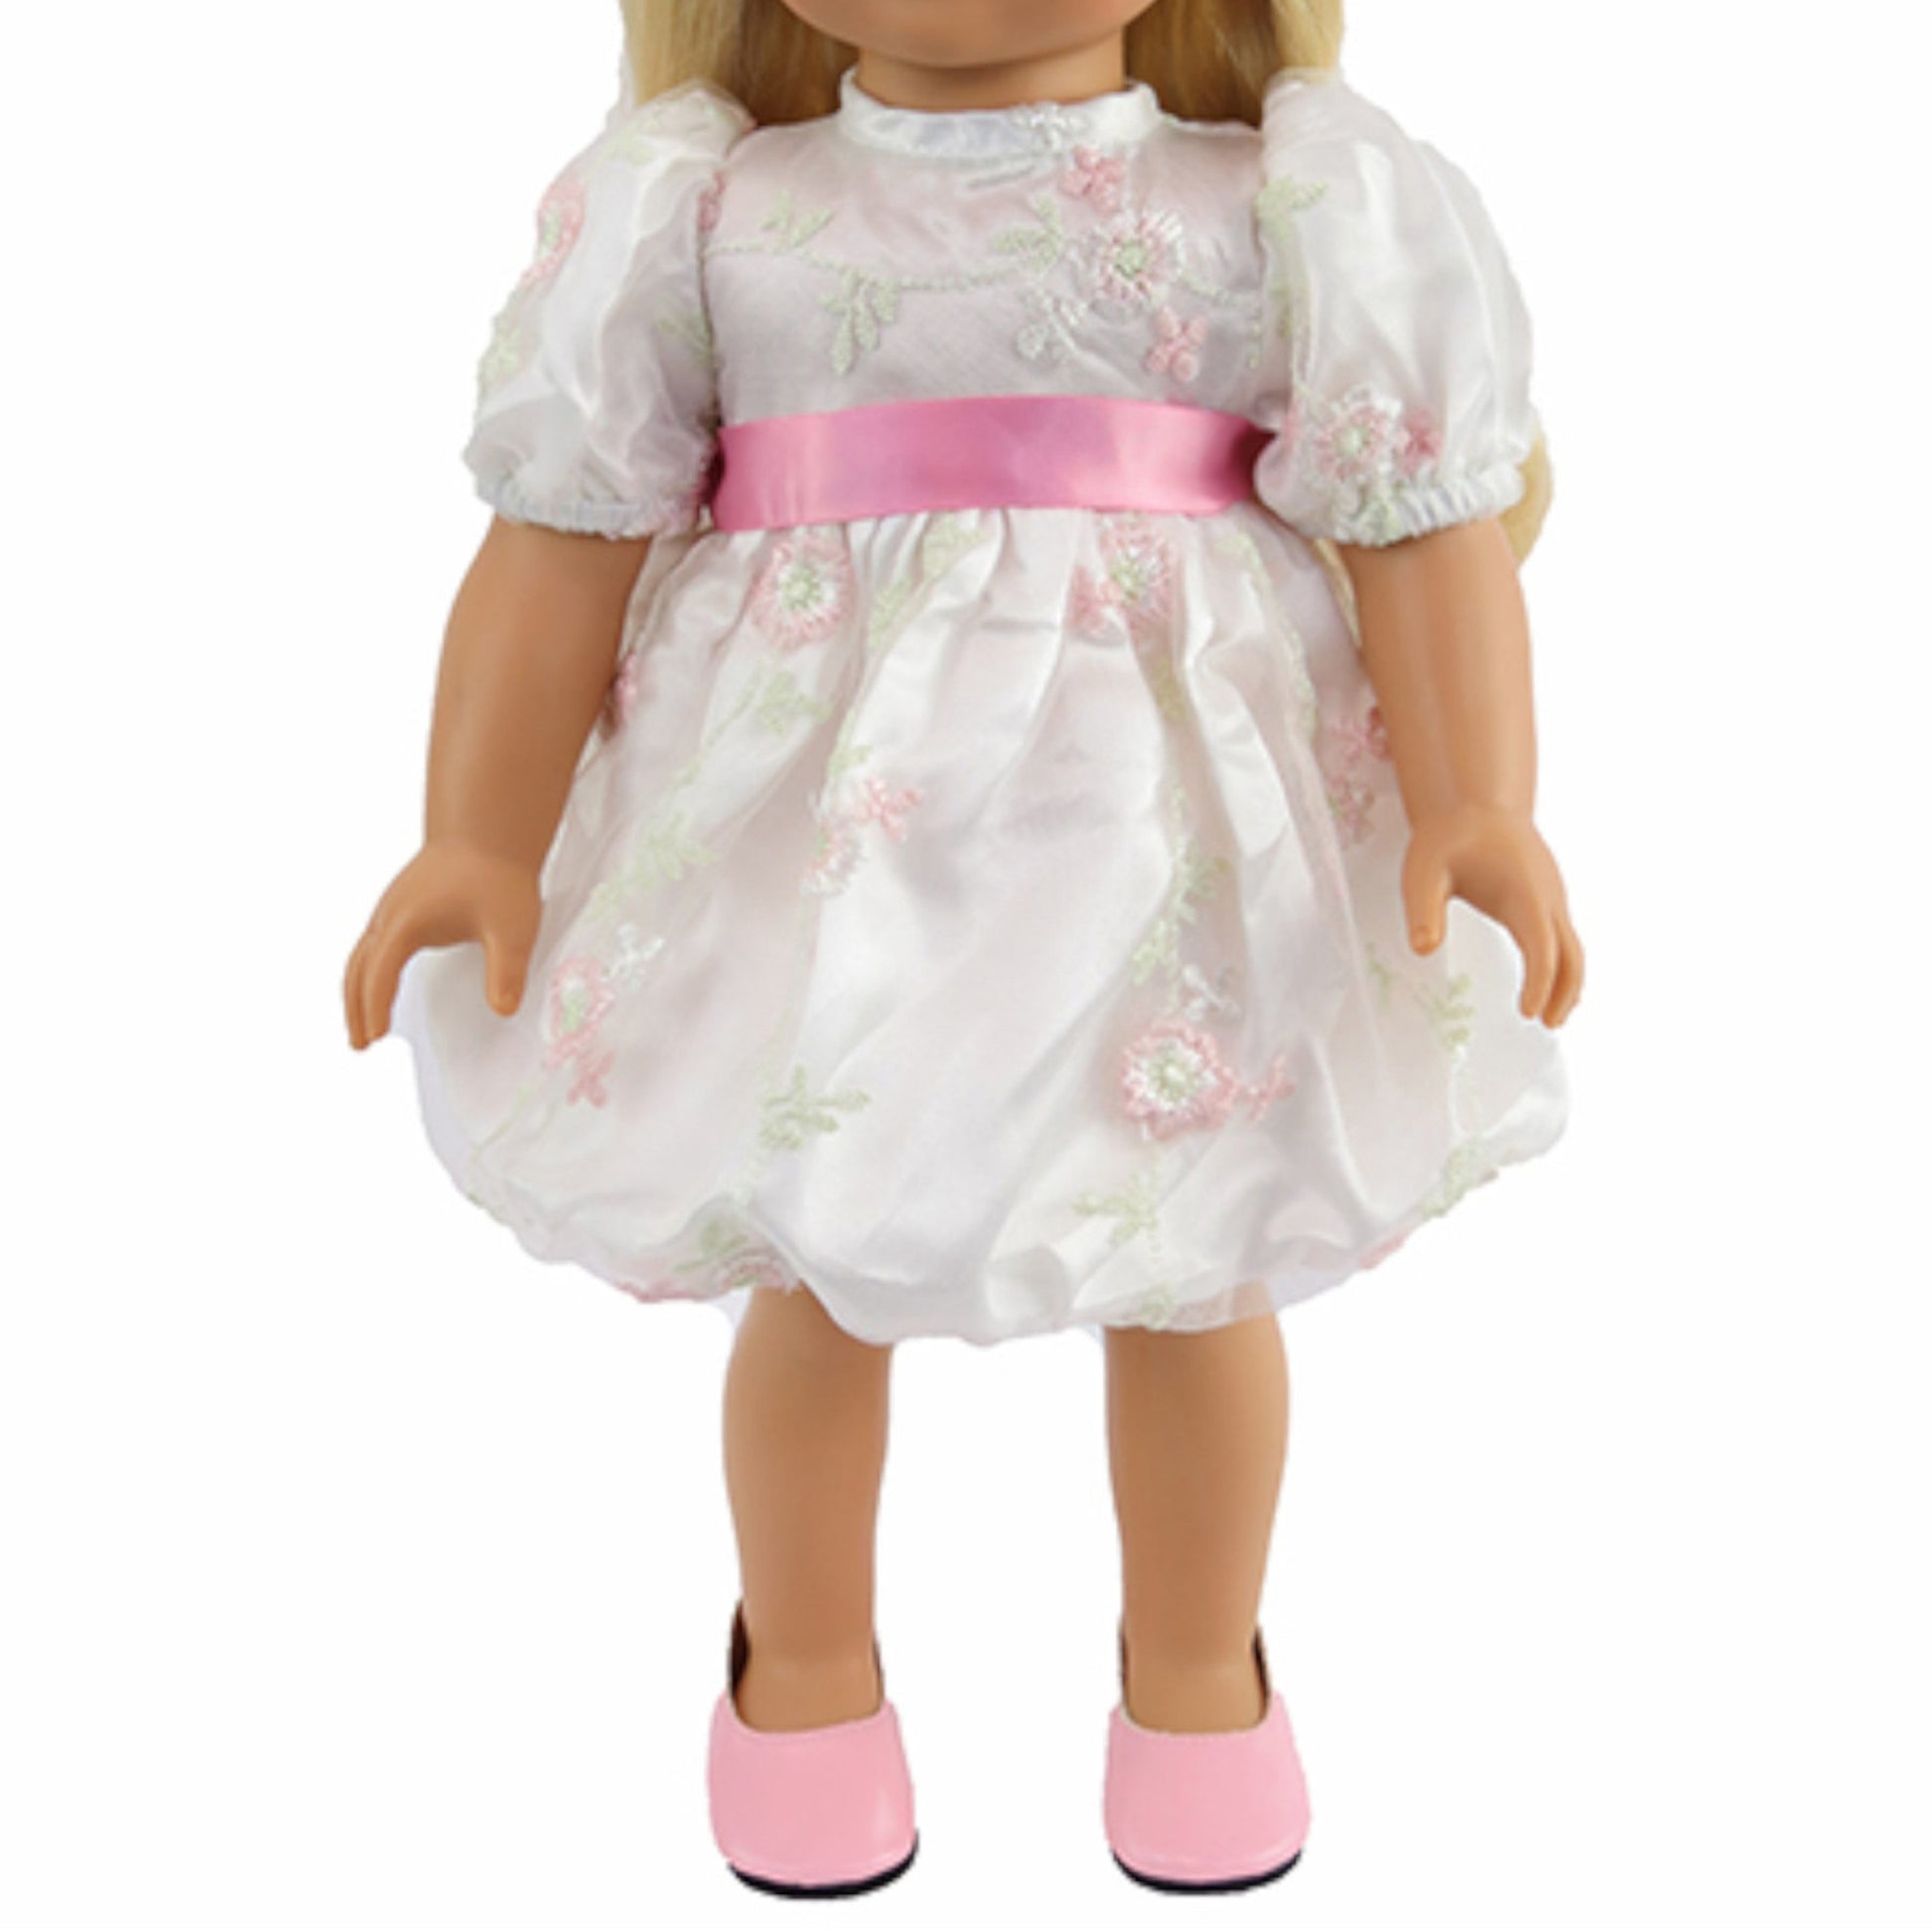 White Easter Dress with Floral Embroidery for 18-inch dolls with doll